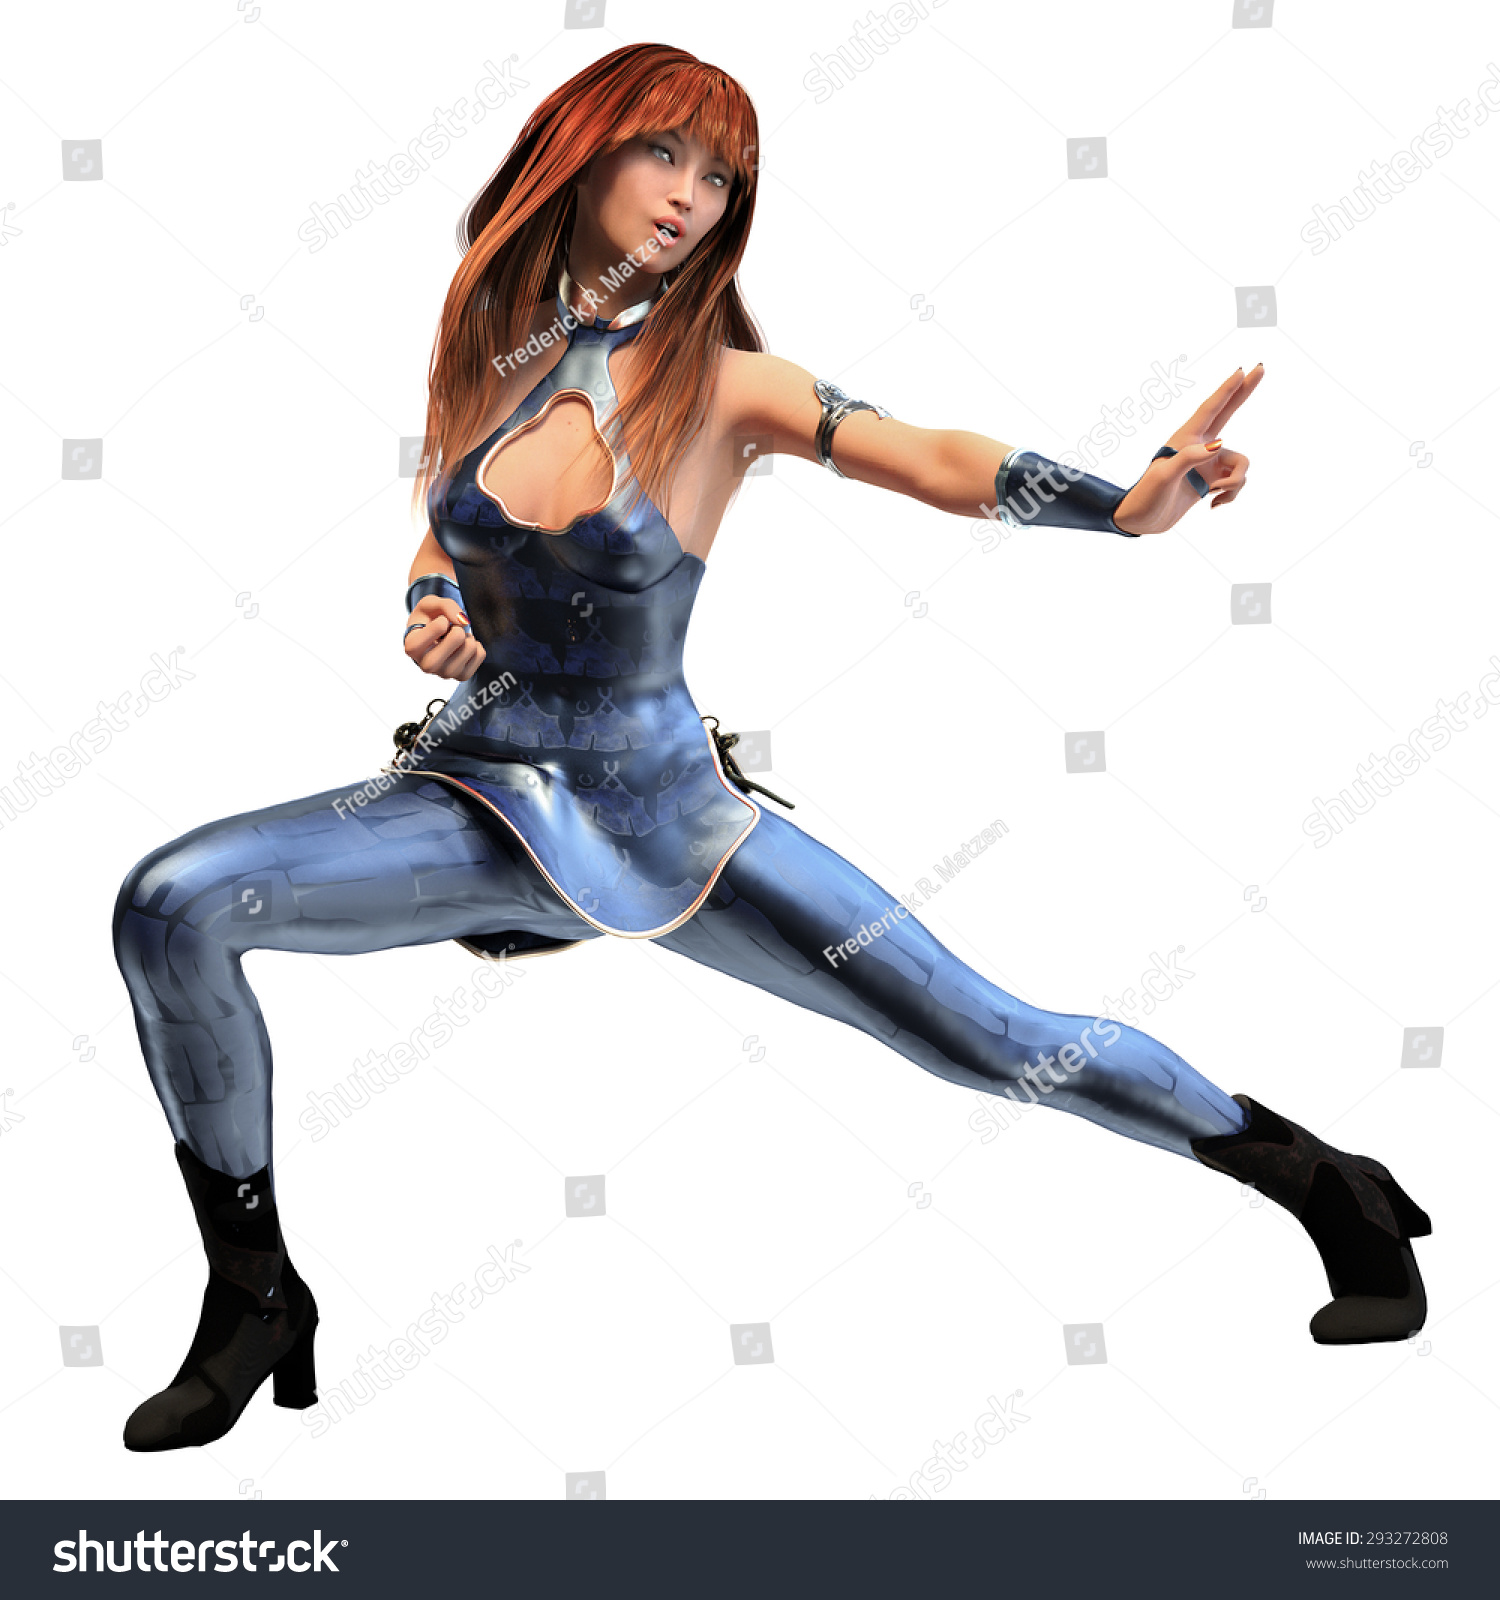 Young Lady Martial Arts Pose Stock Illustration 293272808 - Shutterstock